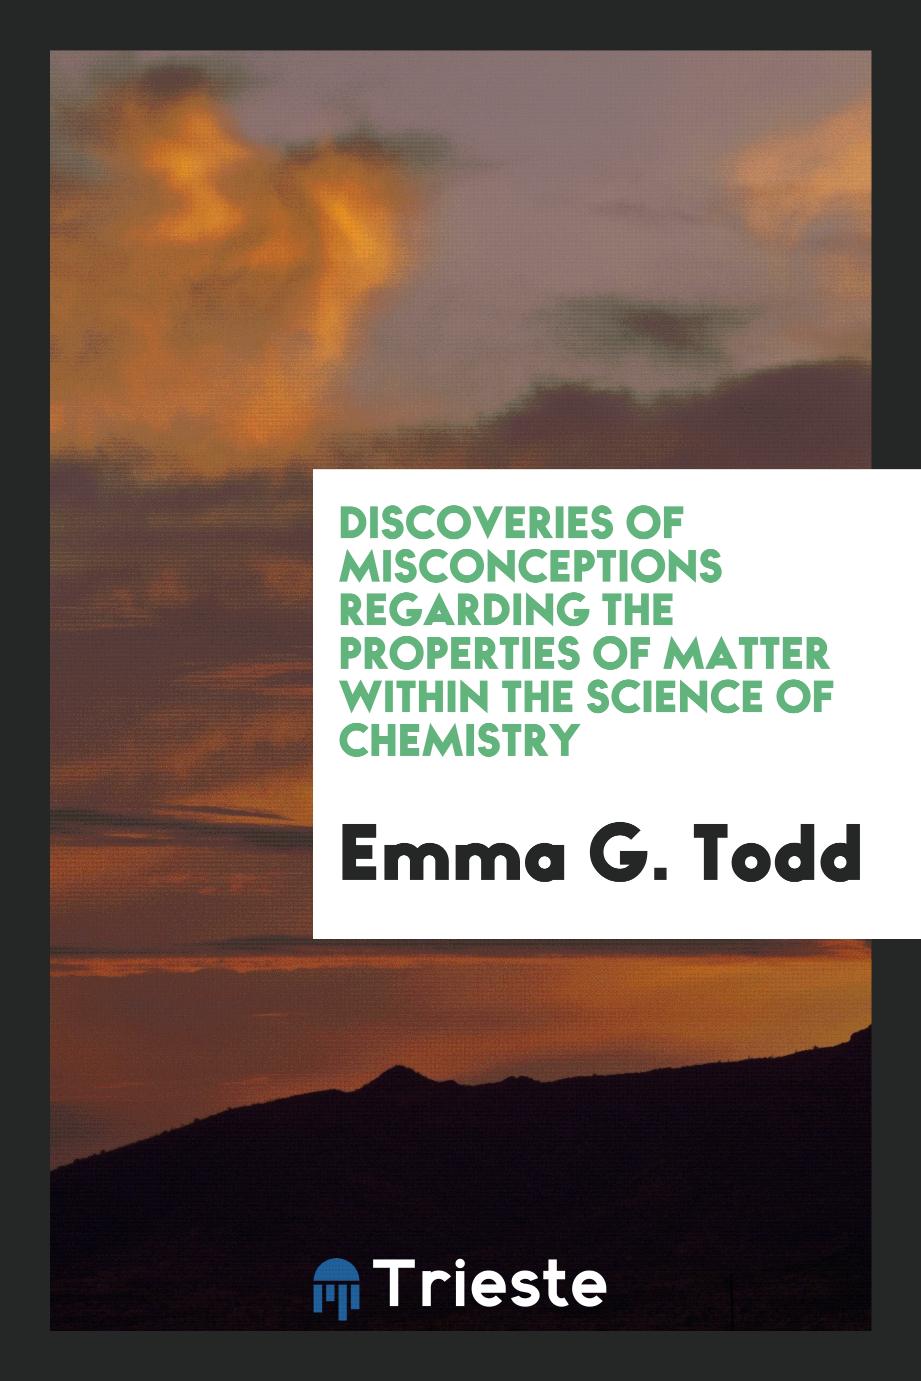 Discoveries of misconceptions regarding the properties of matter within the science of chemistry